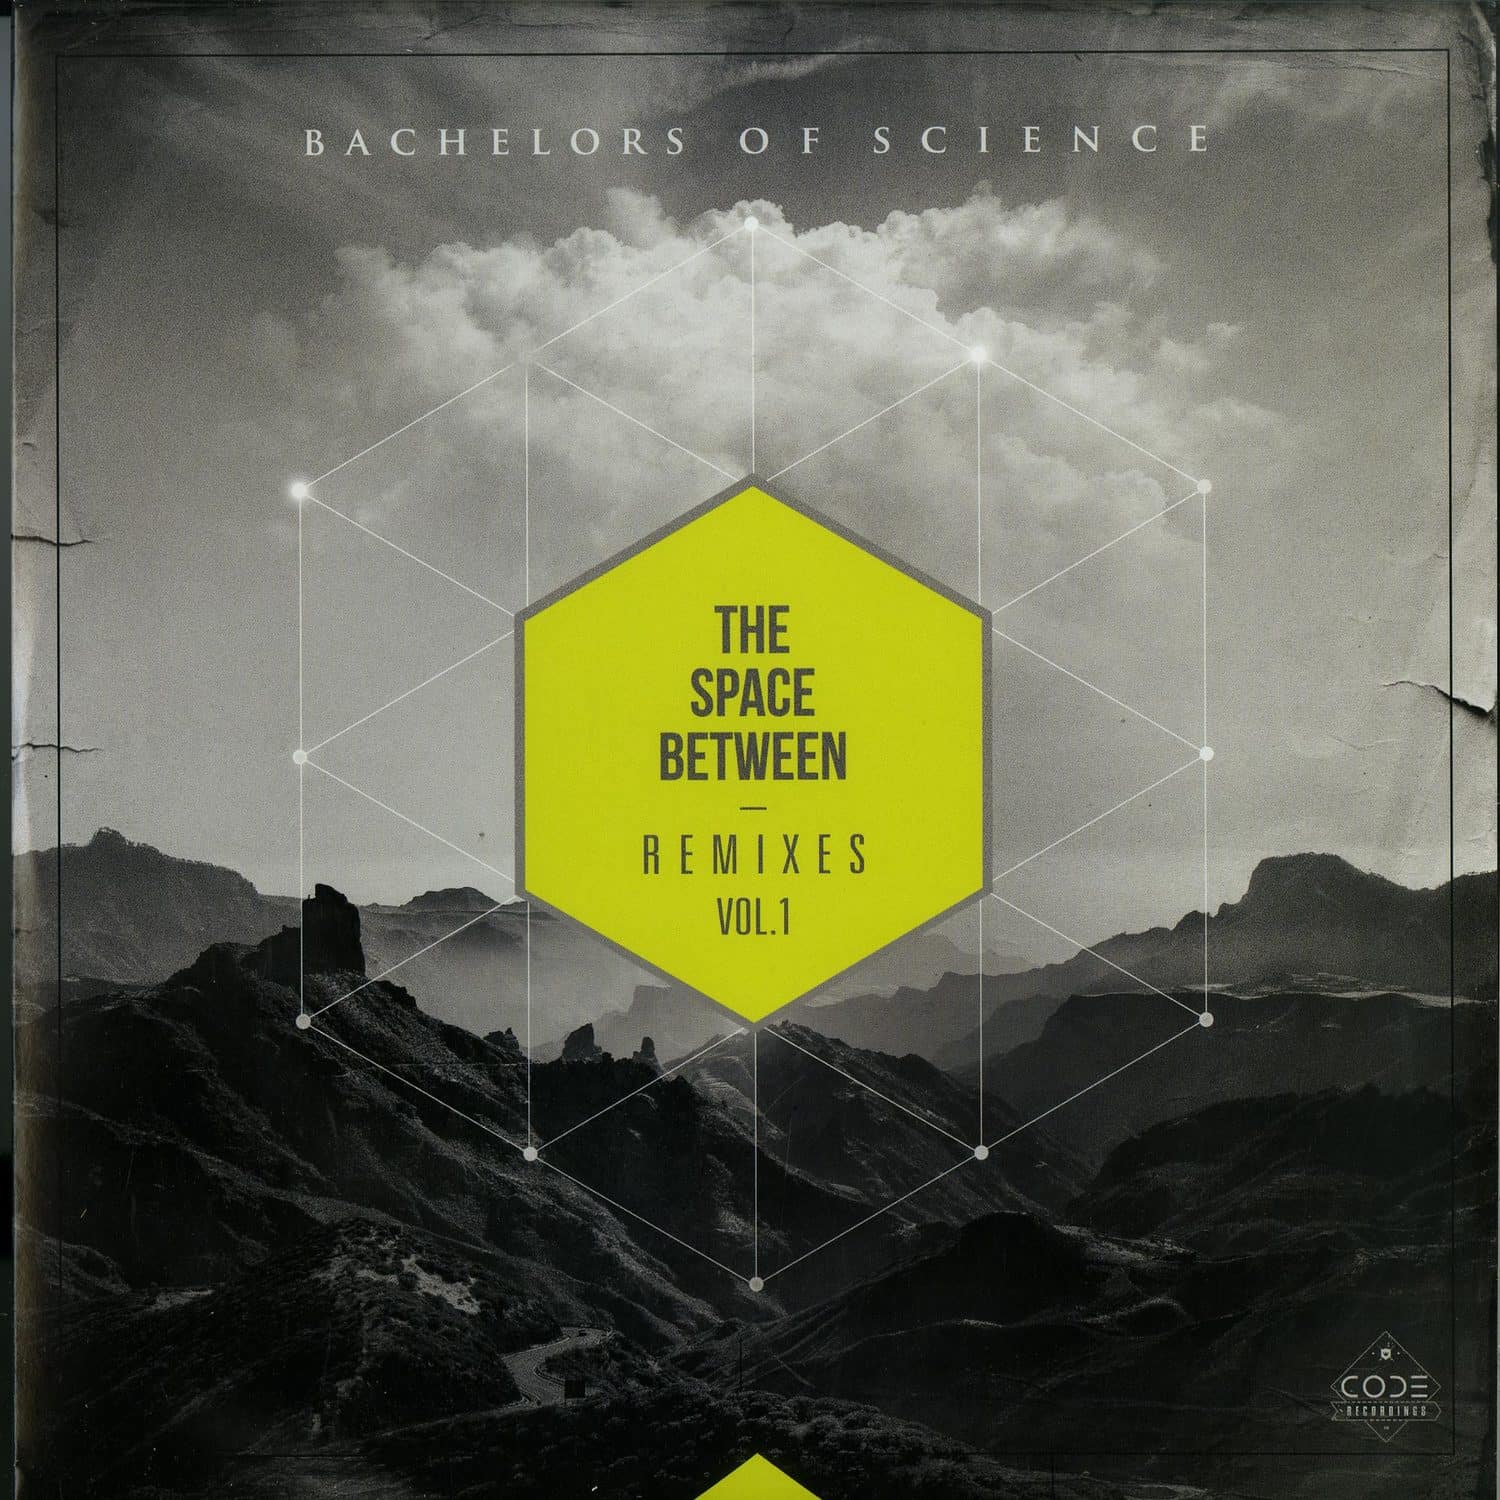 Bachelors Of Science - THE SPACE BETWEEN REMIXES VOL. 1